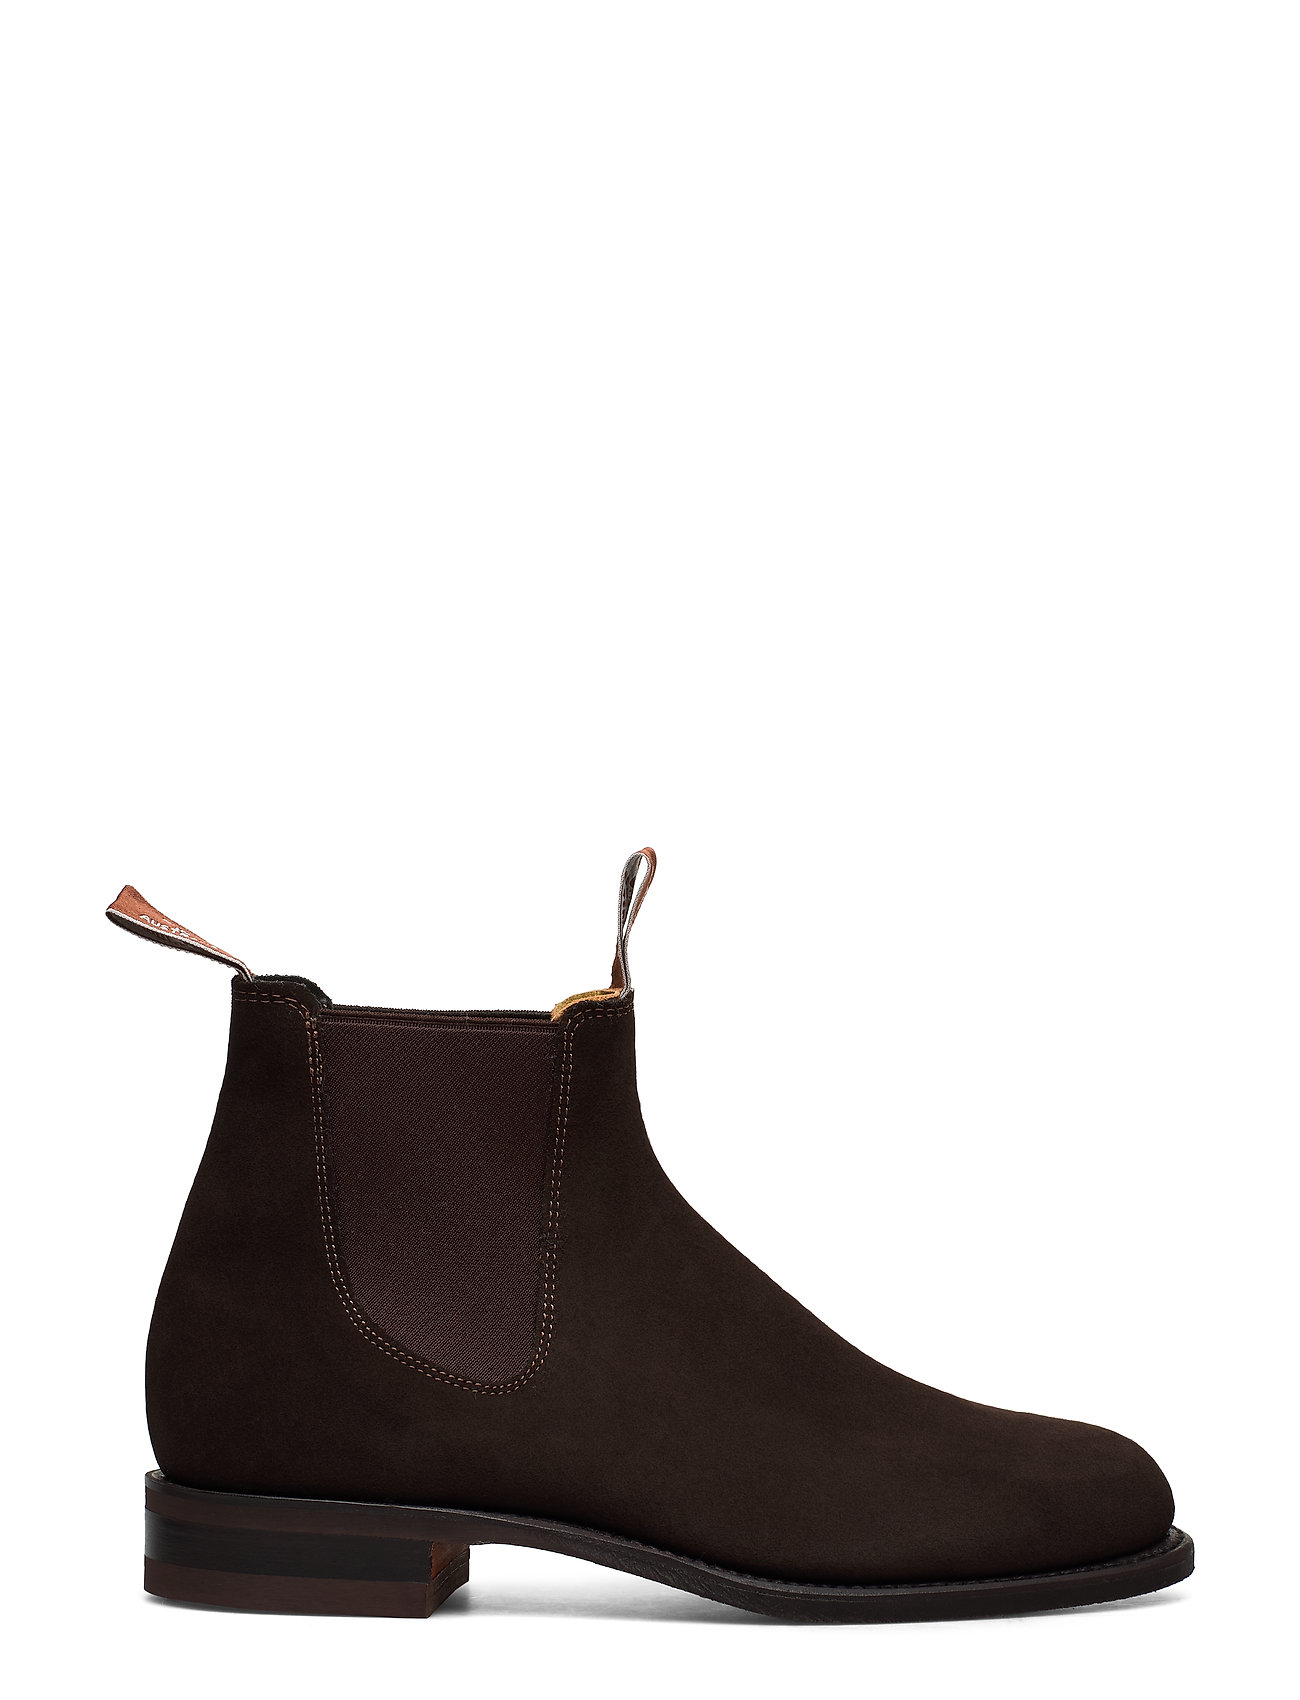 R.M. Williams - Wentworth G-last Suede Chocolate - boots - chocolate - 1